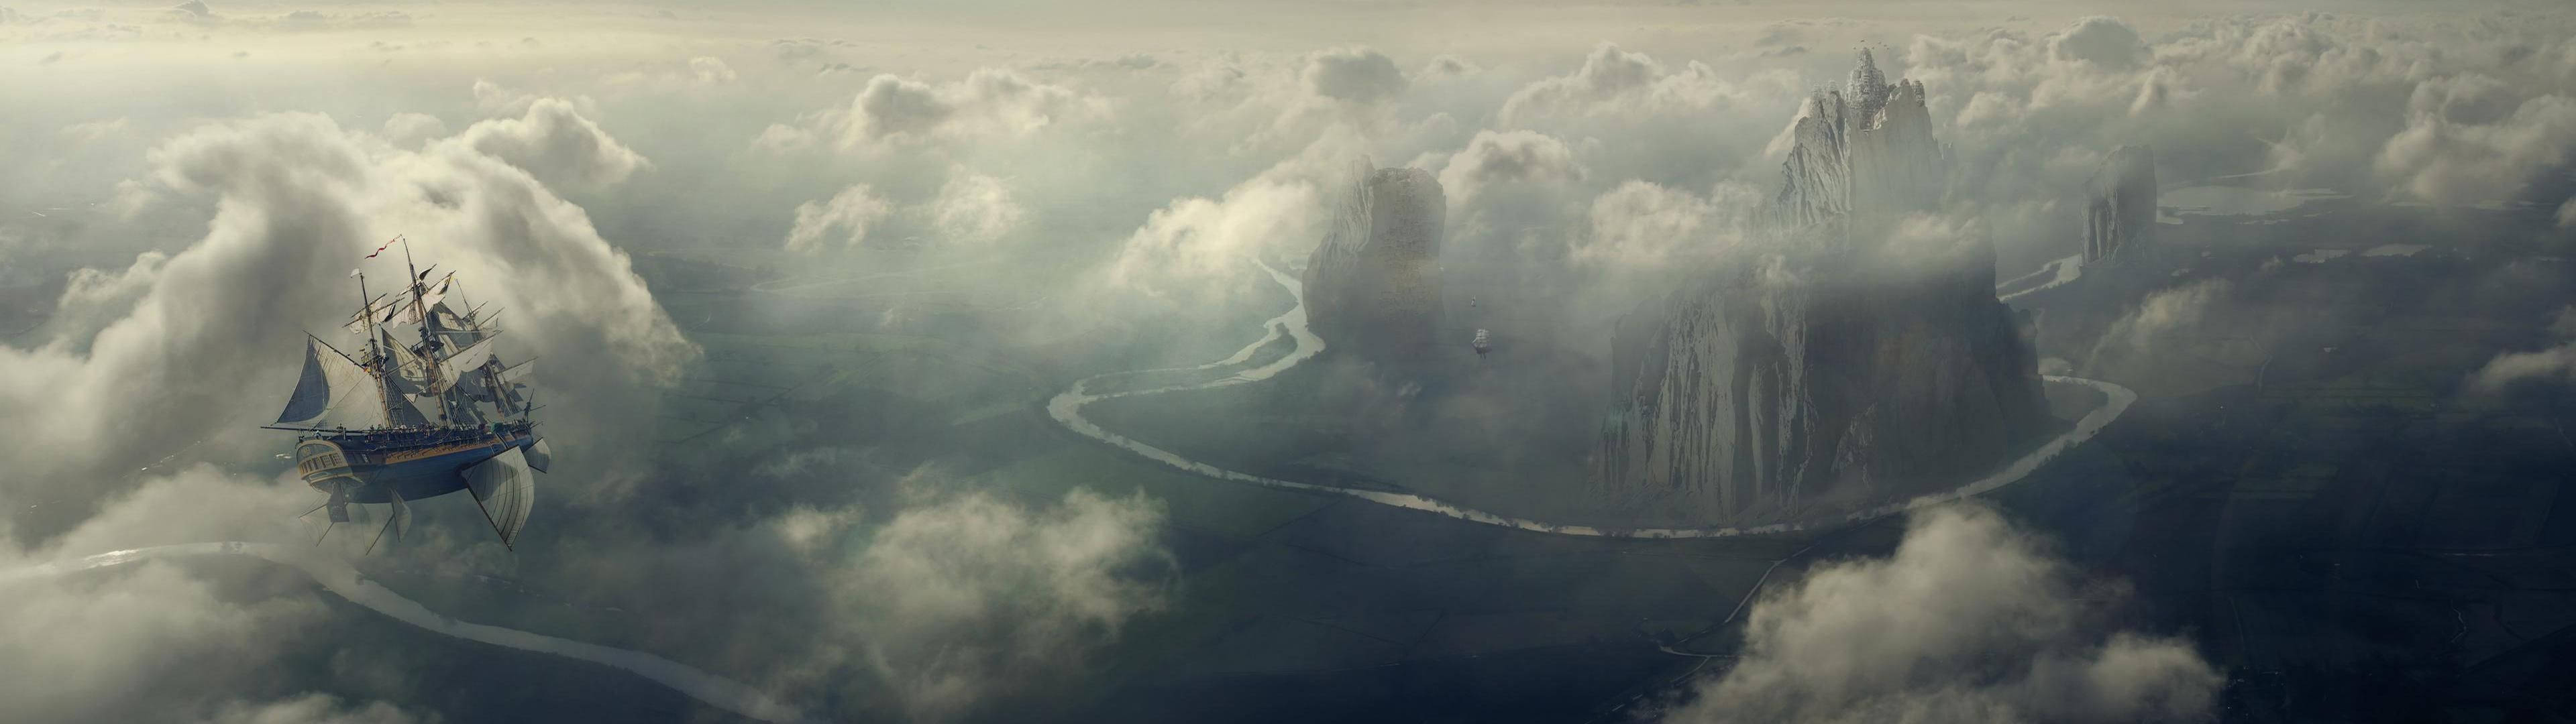 An epic view of a ship floating amidst clouds in the sky Wallpaper